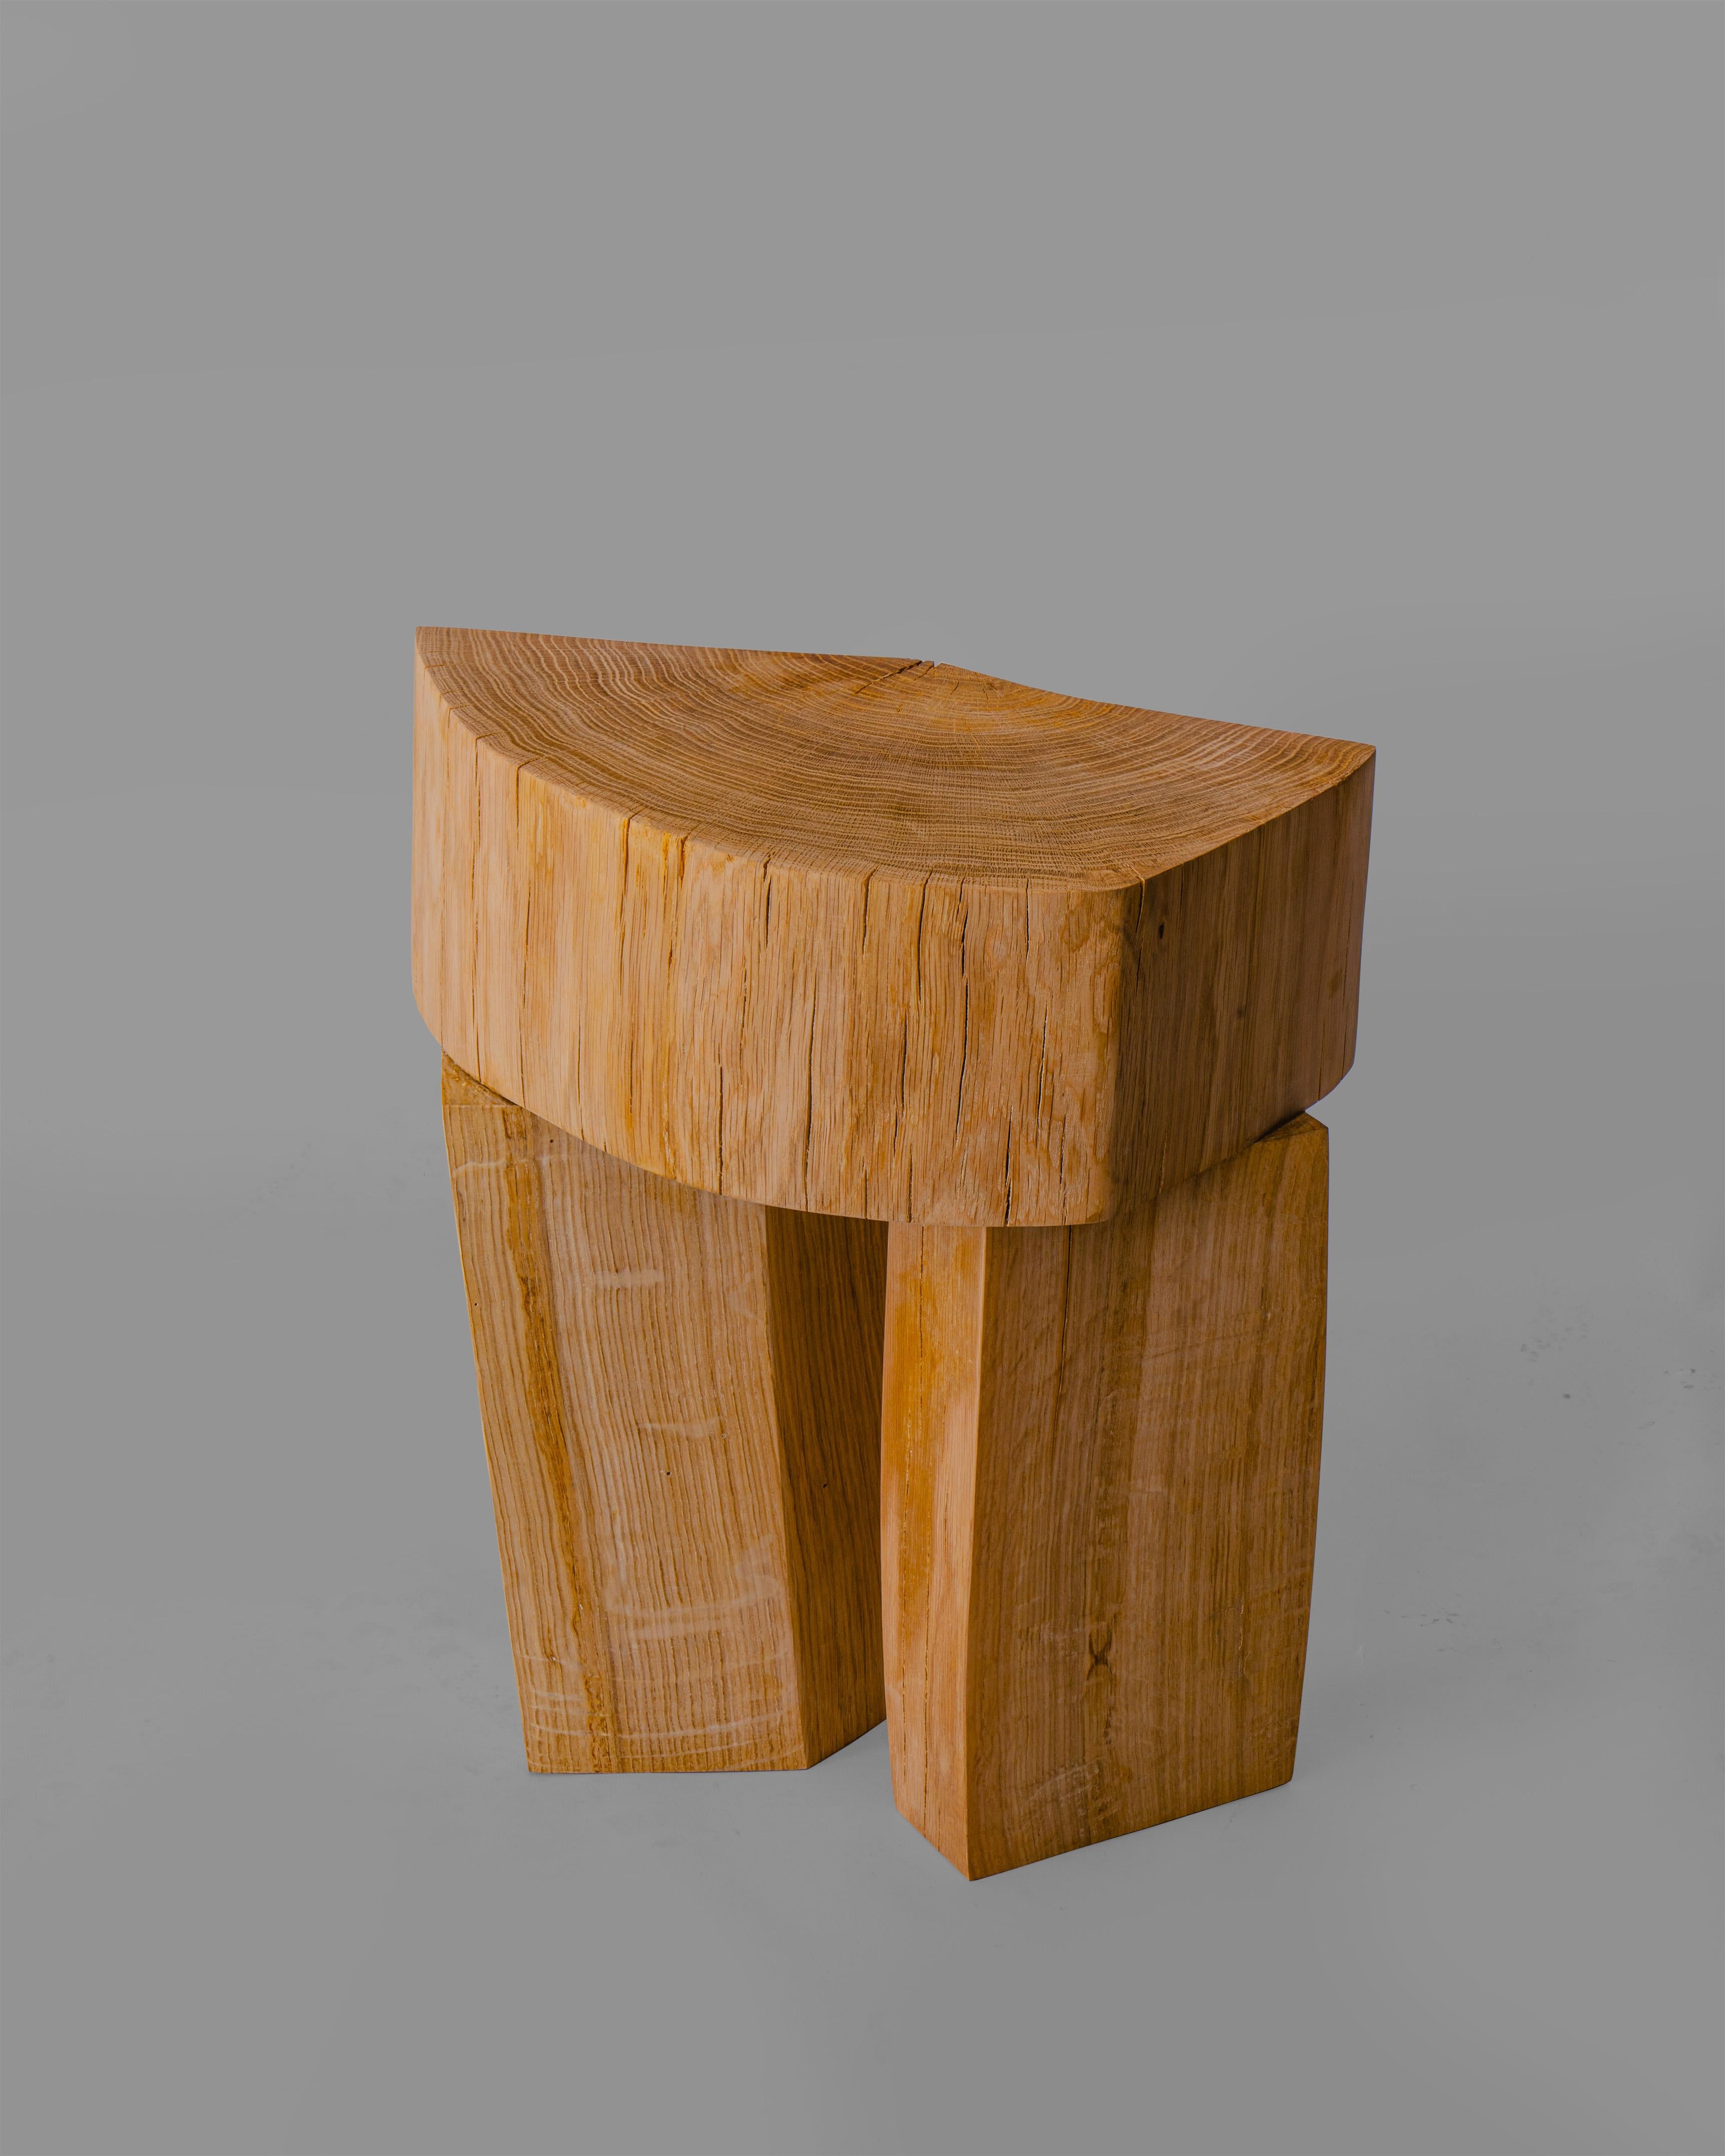 Stool 3 is part of a collection of stools designed by the studio Heim+Viladrich. The collection was crafted from wood fragments sourced from oak trees felled during the construction of a road in Aubrac, Occitanie region, France. Each stool is